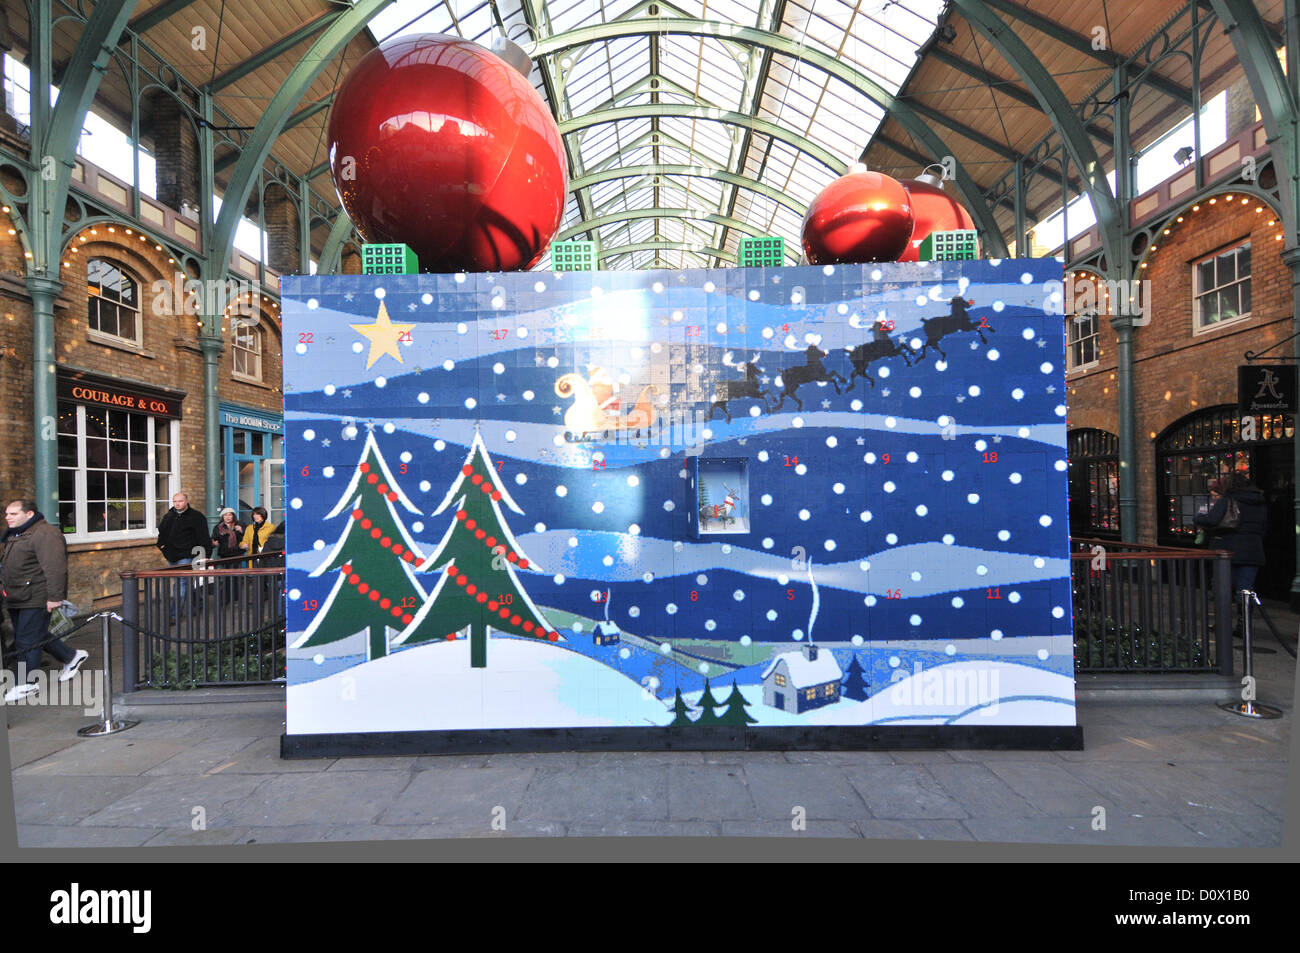 Covent Garden, London, UK. 2nd December 2012. The first door is opened on the Lego Advent Calendar. A giant Lego Advent Calendar in Covent Garden, built by Duncan Titmarsh from 600,000 bricks. Stock Photo